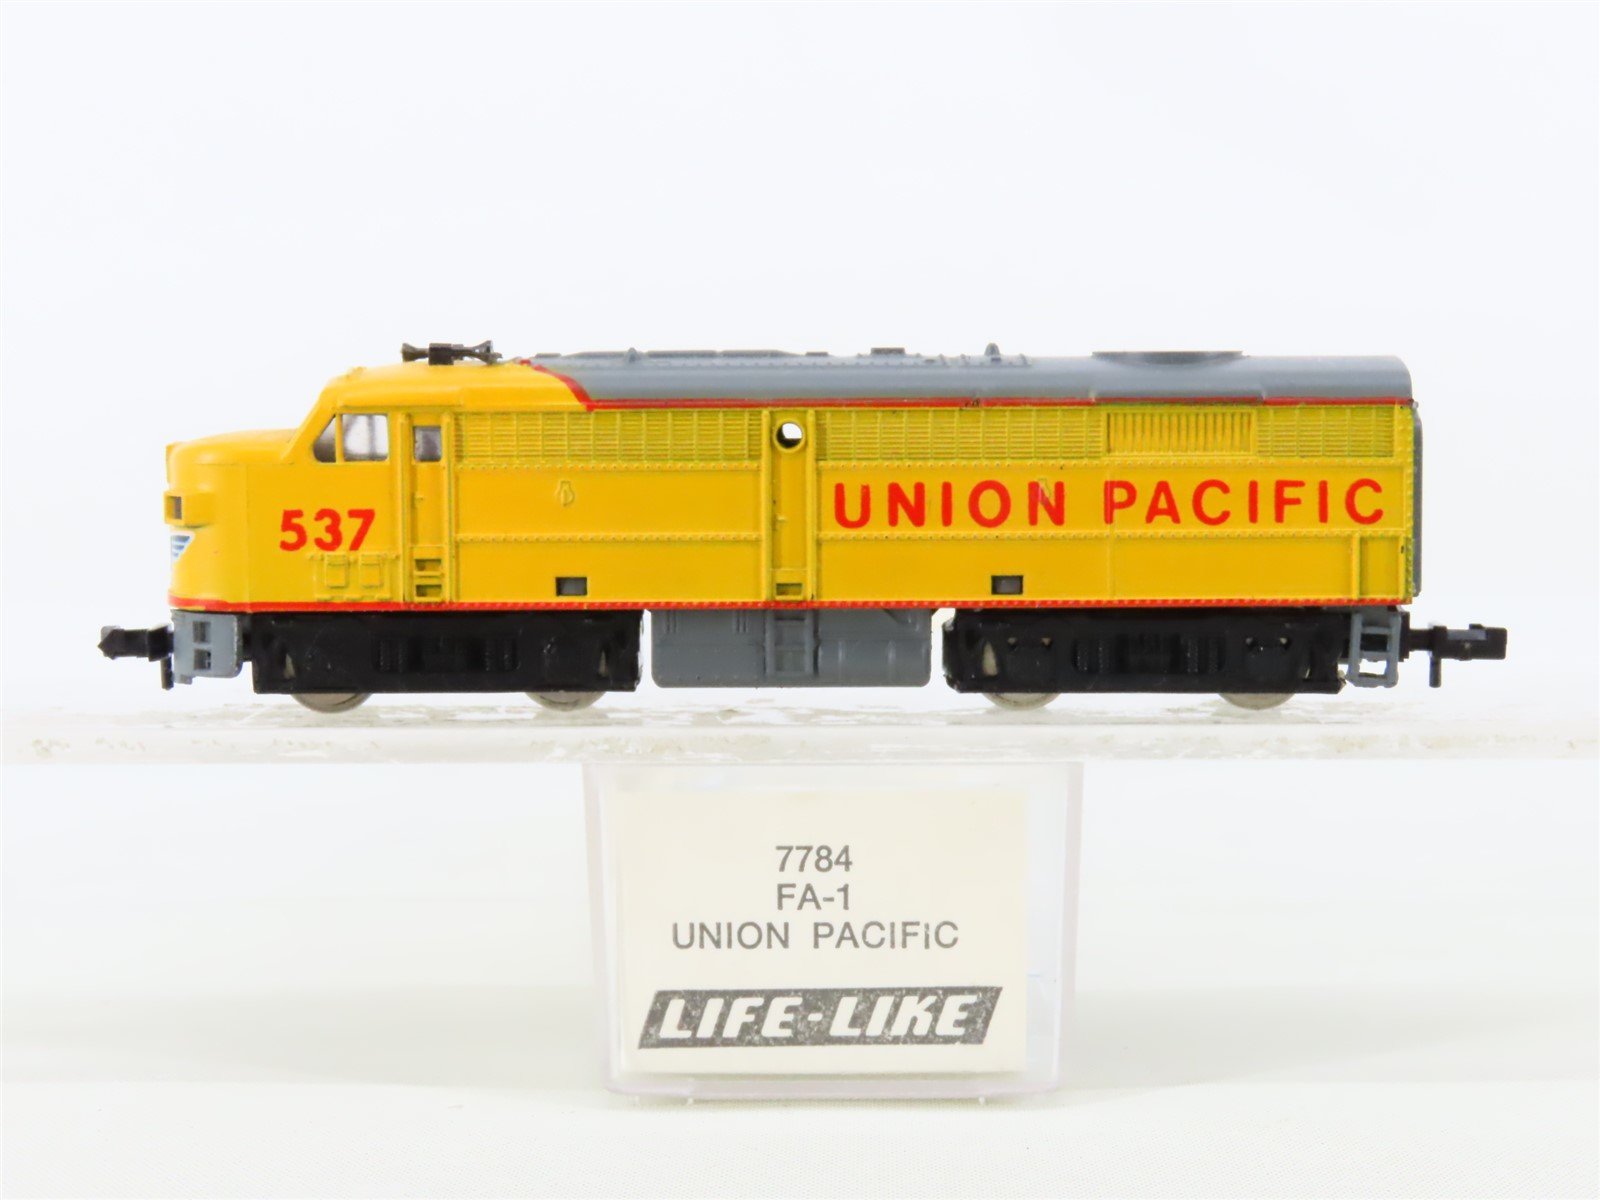 N Scale Life-Like 7784 UP Union Pacific ALCO FA-1 Diesel Locomotive #537